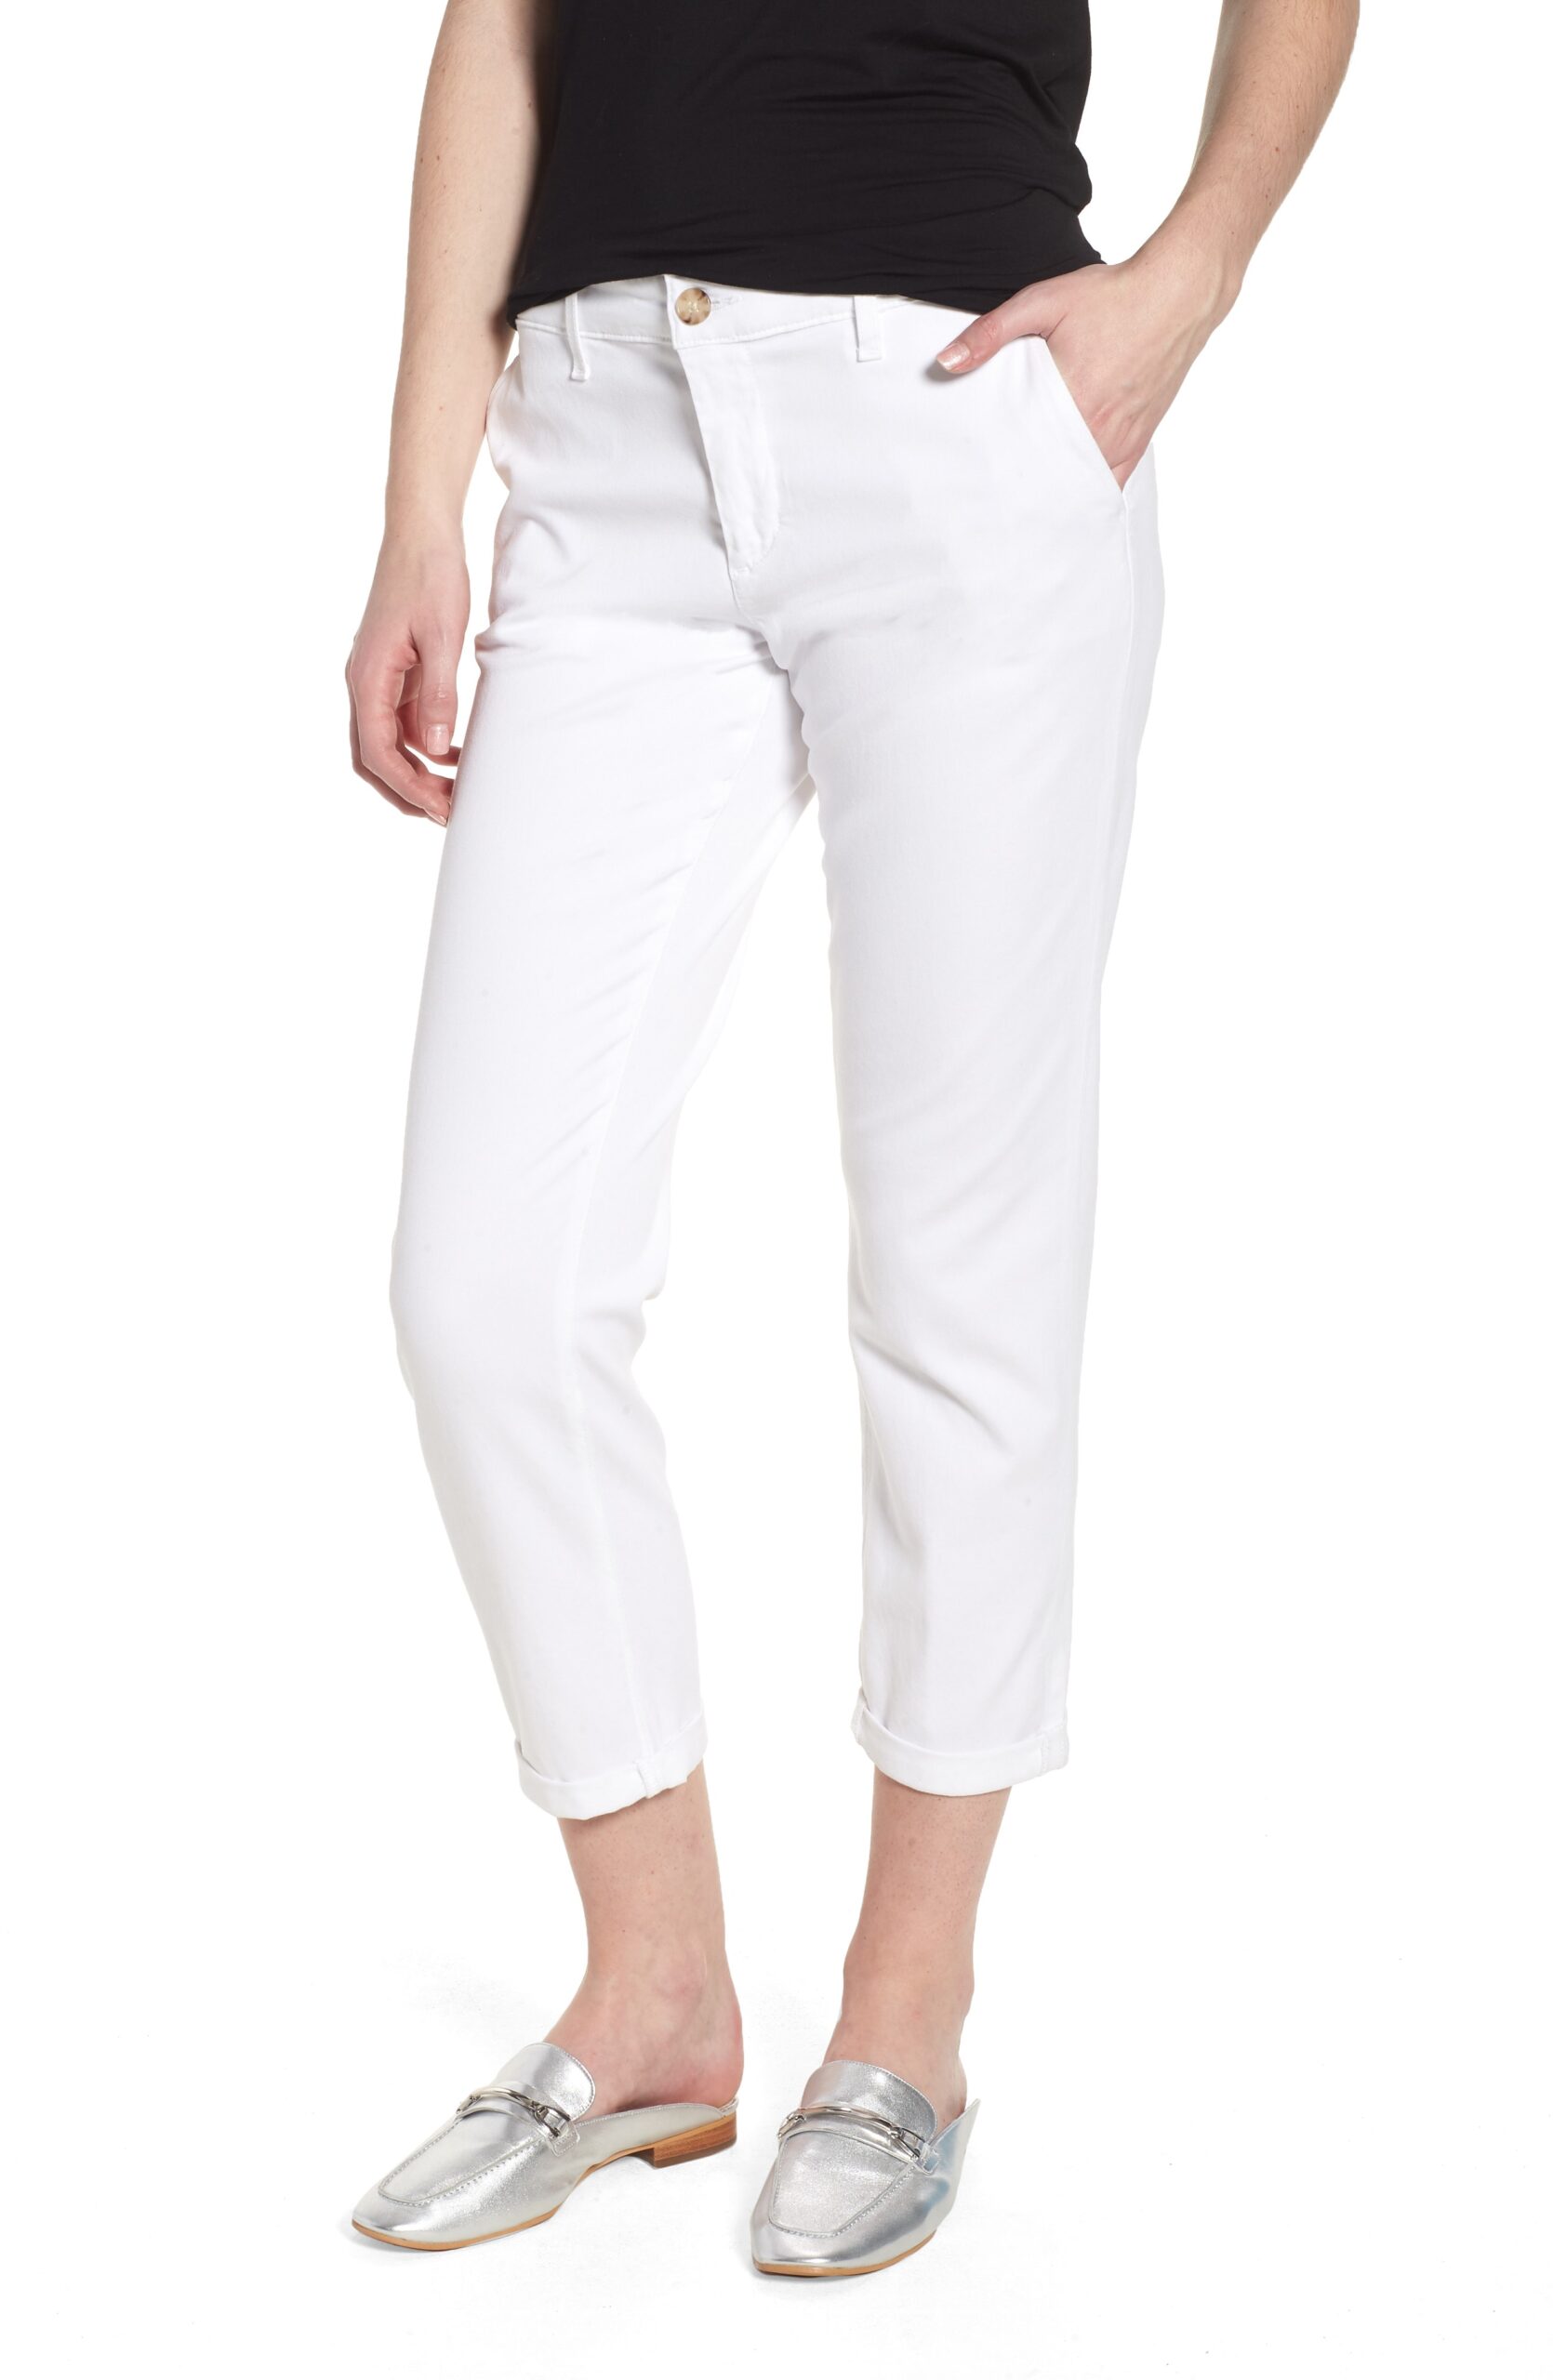 Styles to make by wearing white trousers